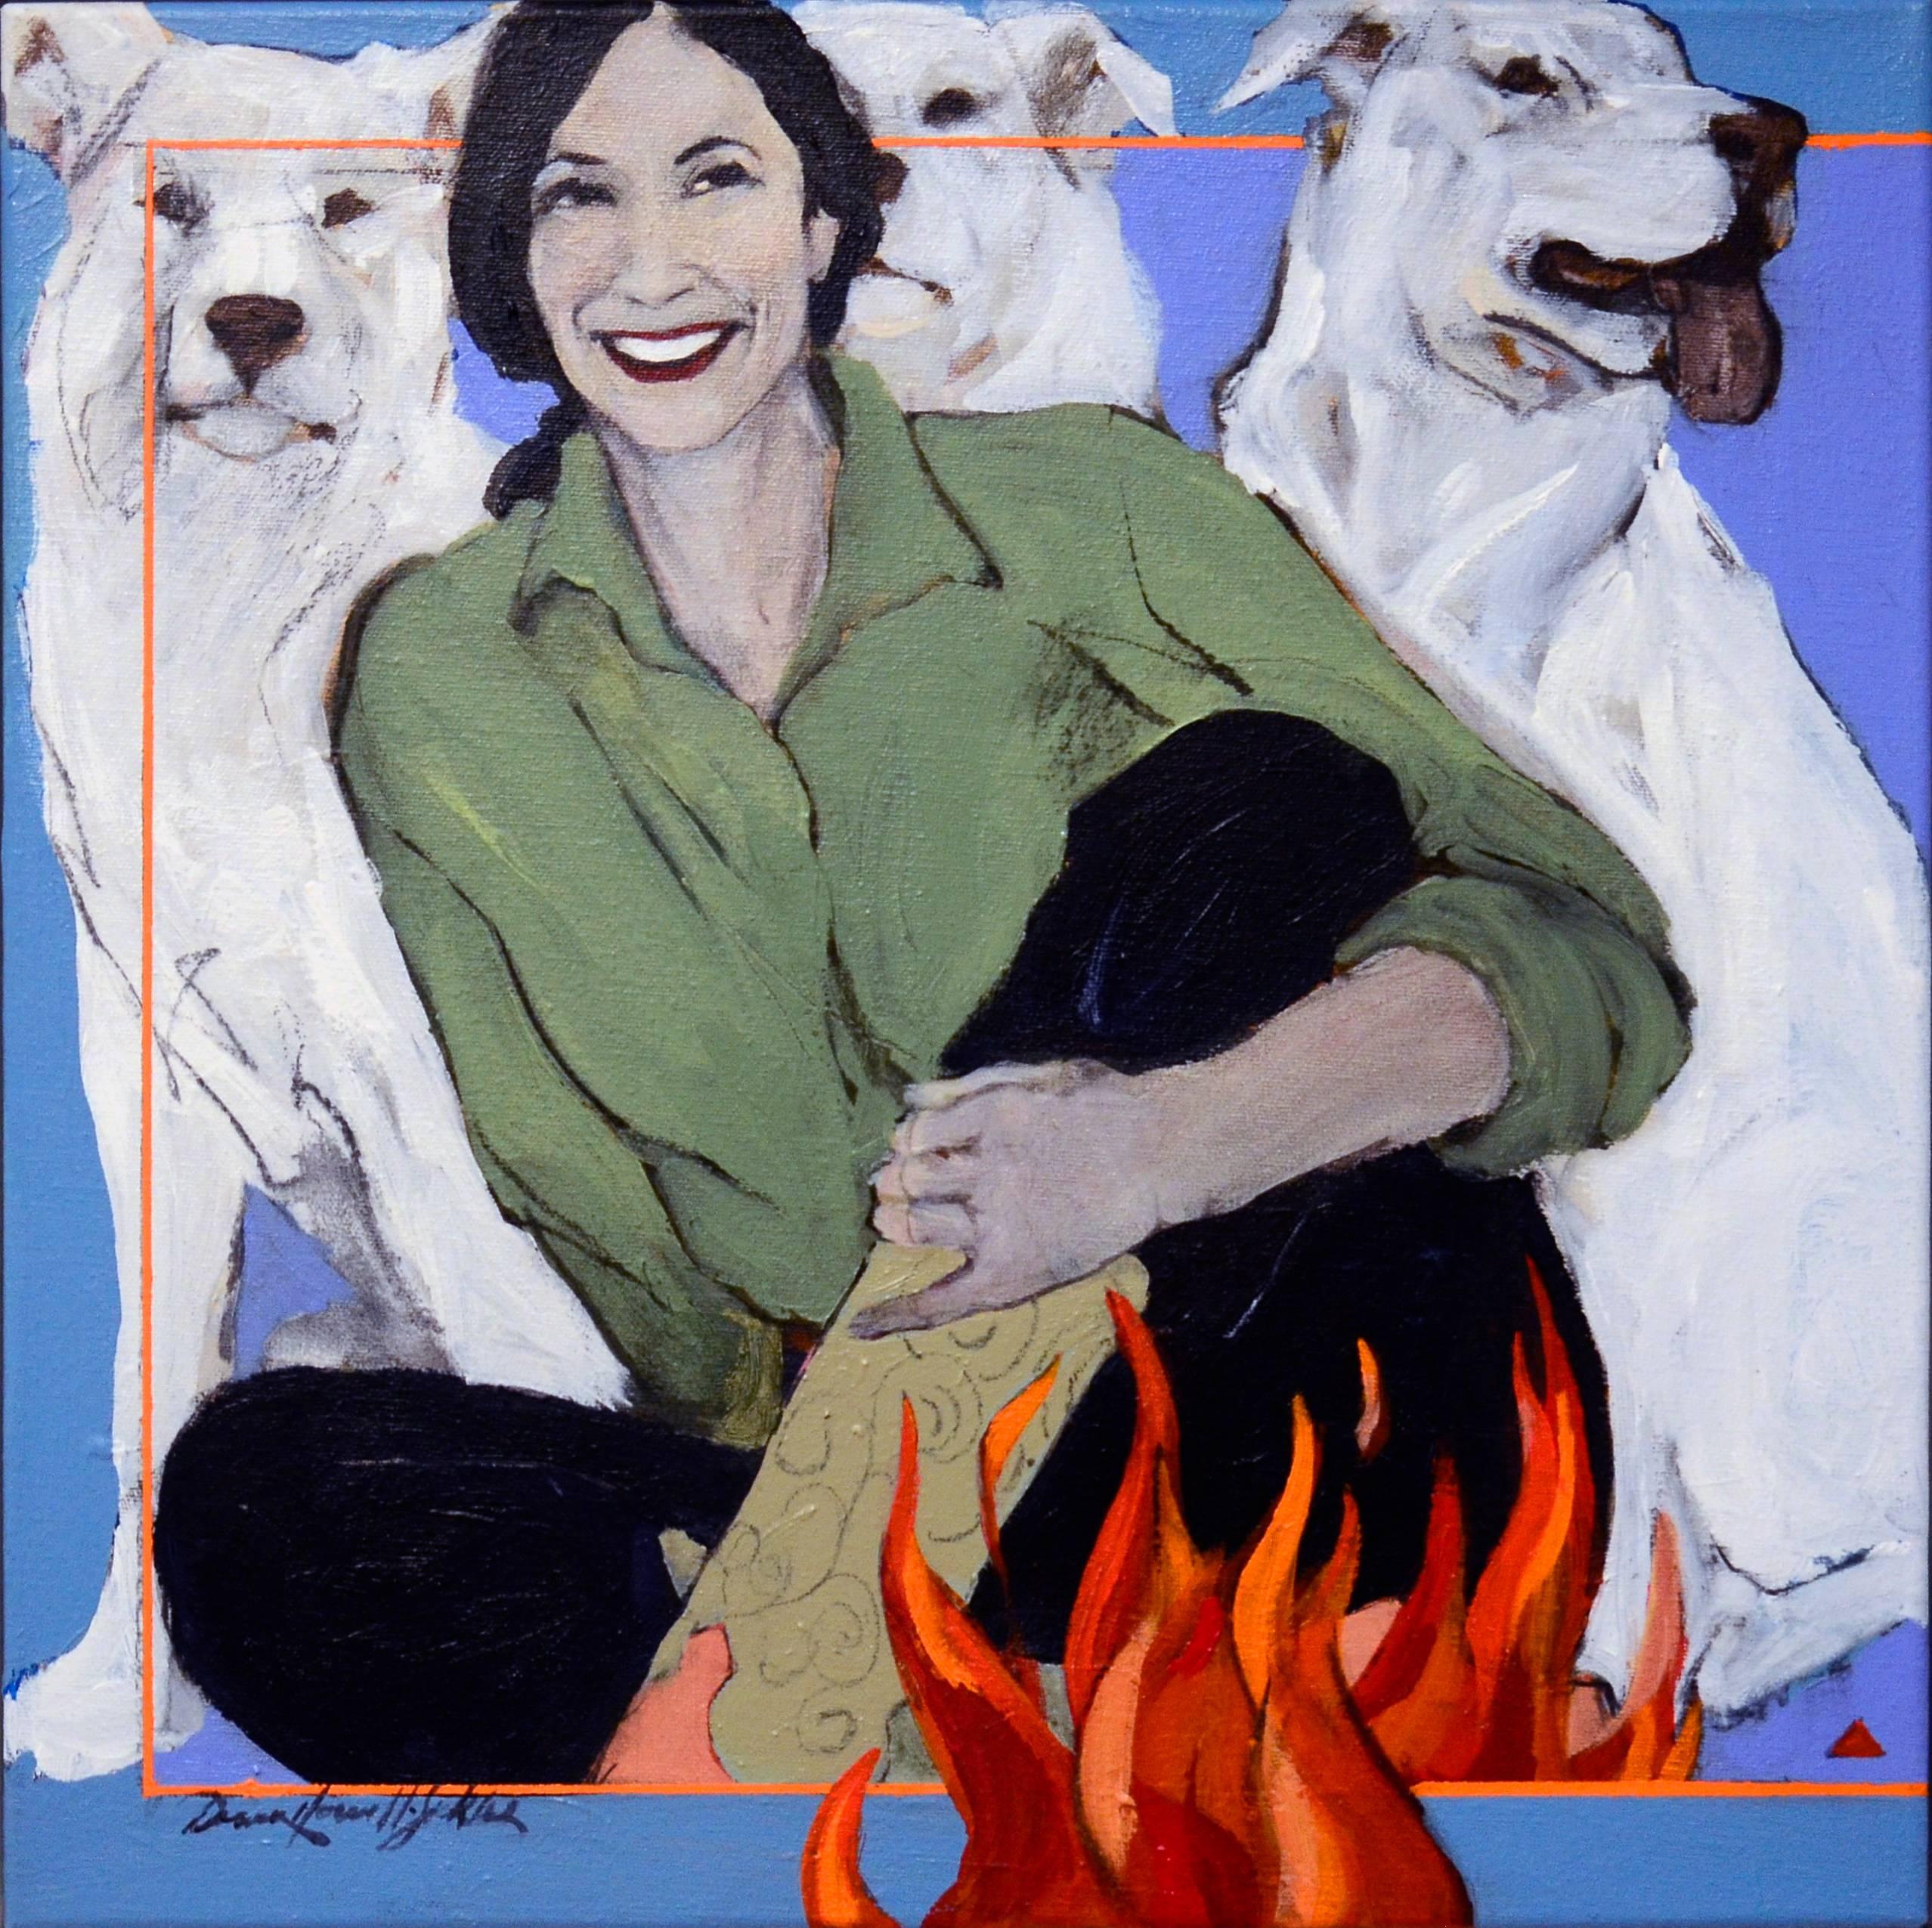 Donna Howell-Sickles Figurative Painting - Laughter by Firelight (cowgirl, campfire, dogs)